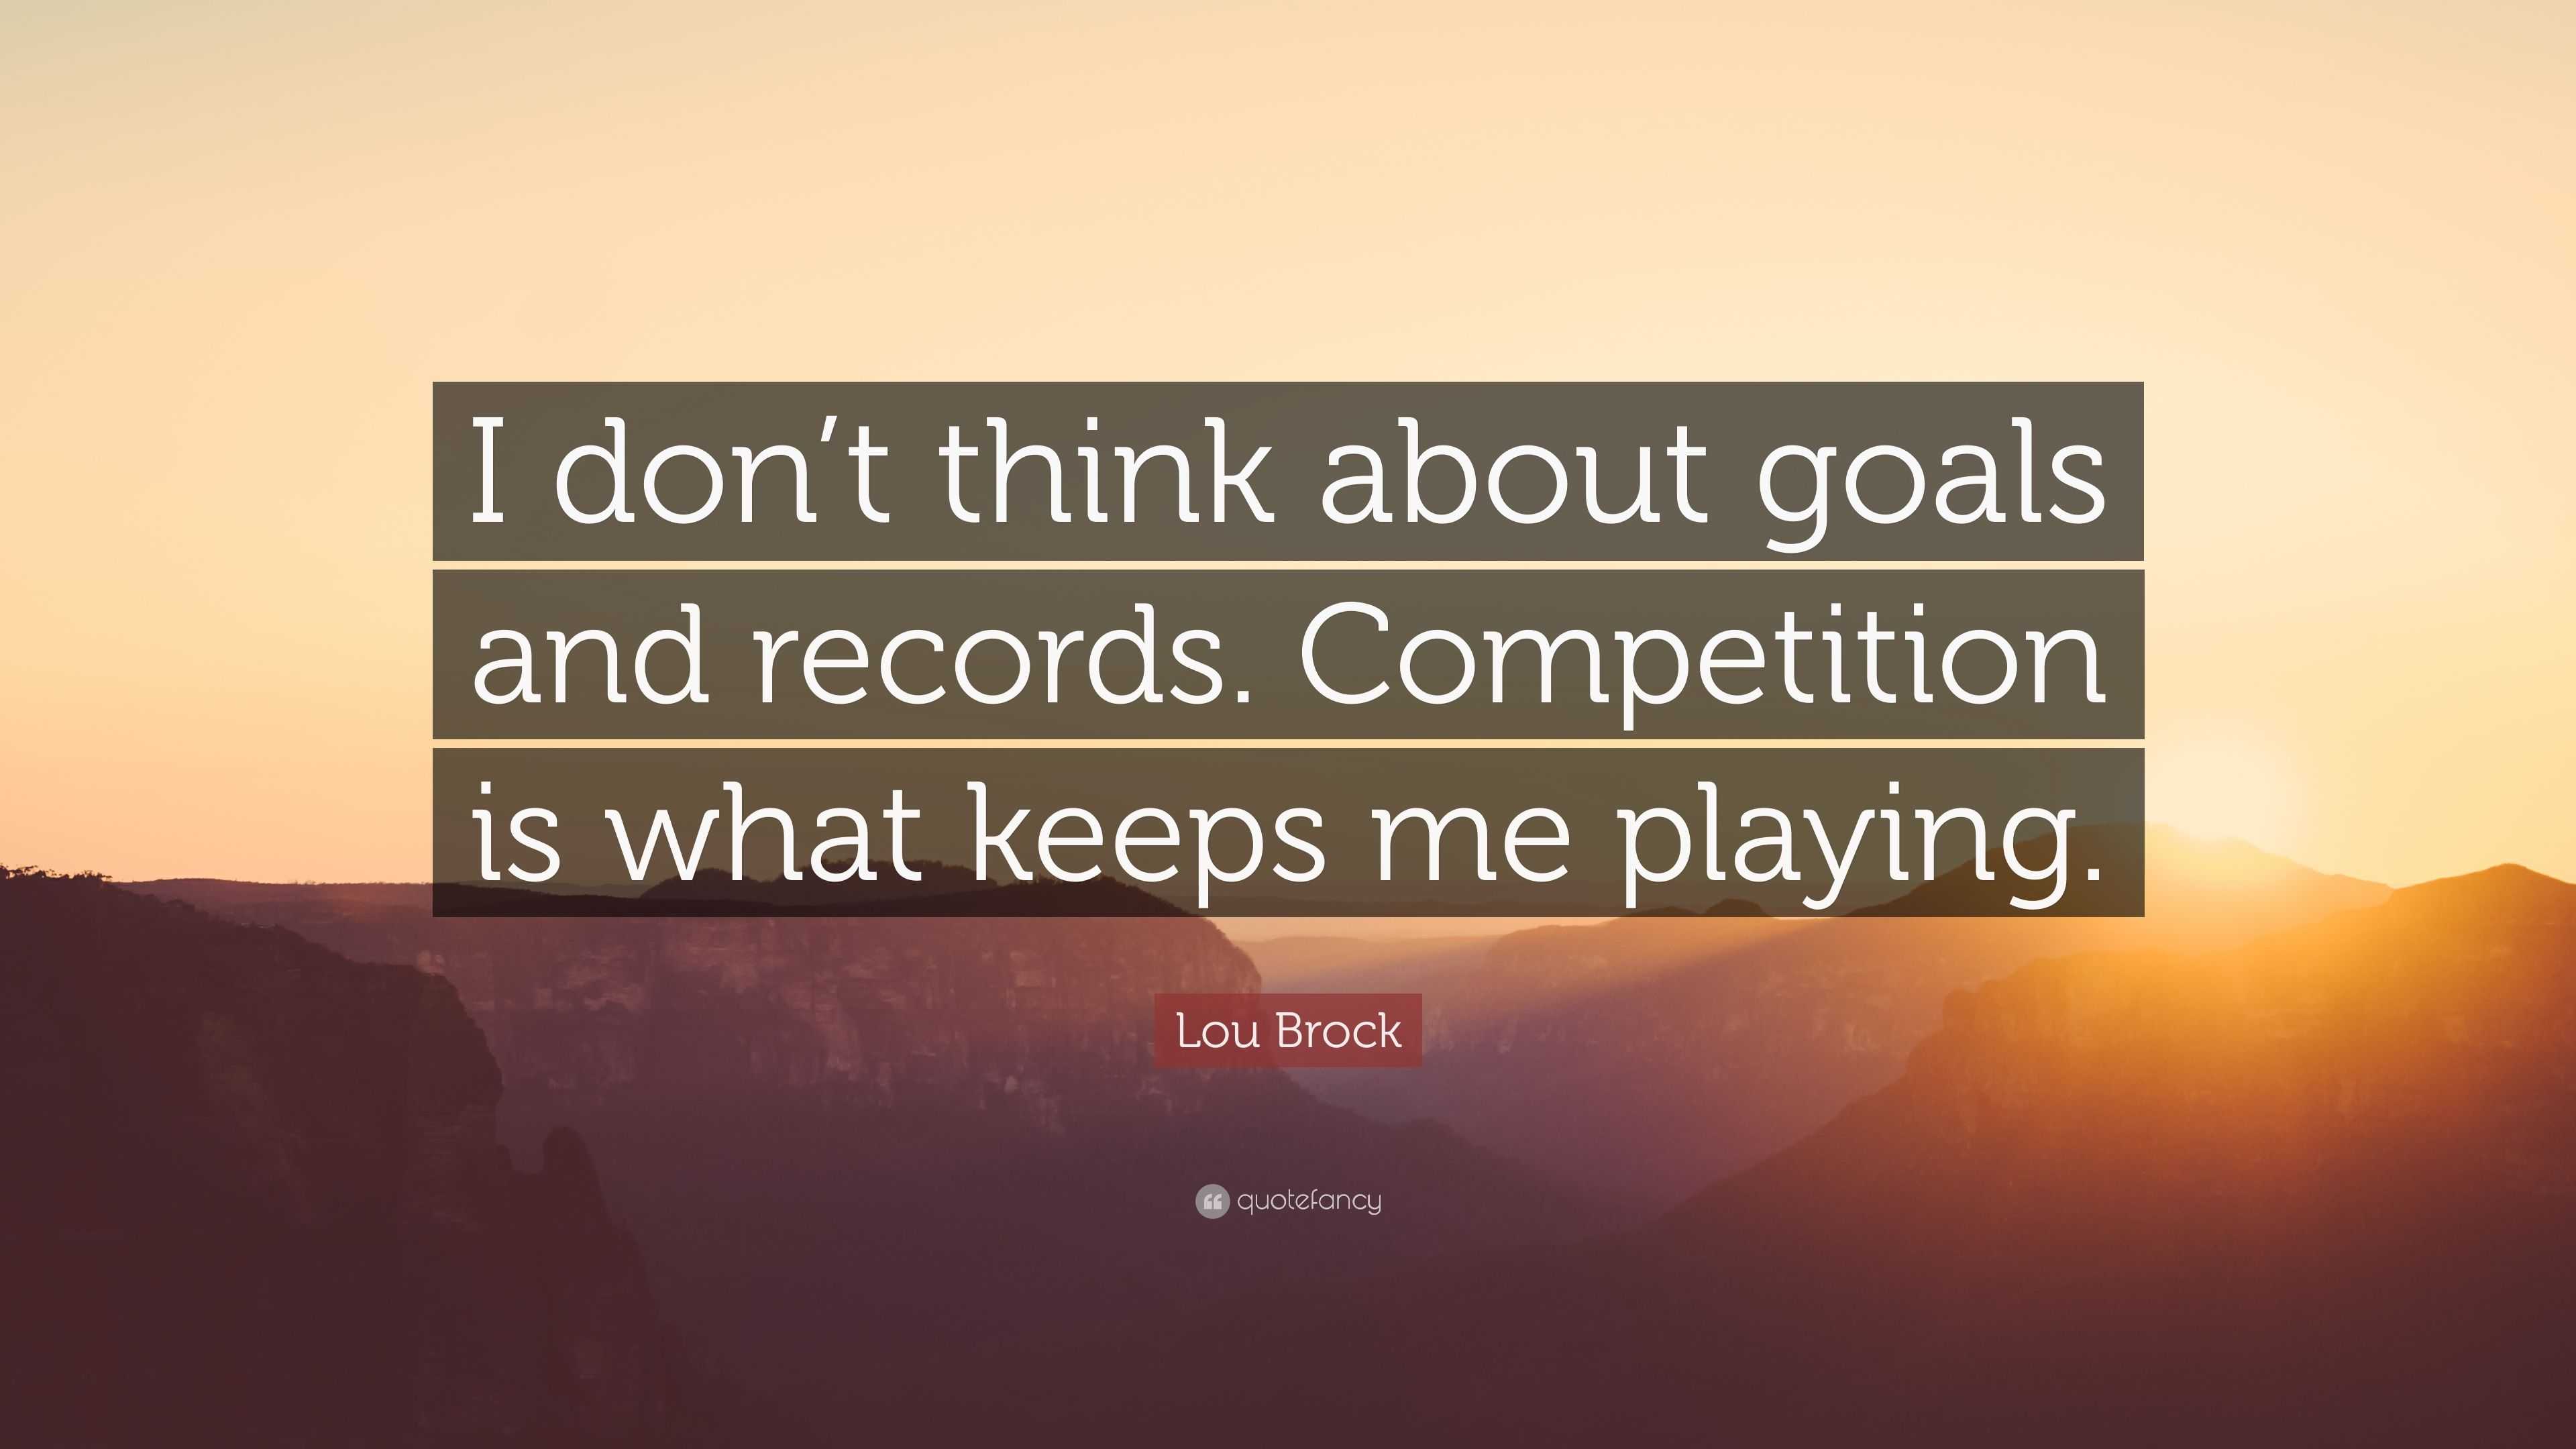 Lou Brock Quote: “I don't think about goals and records